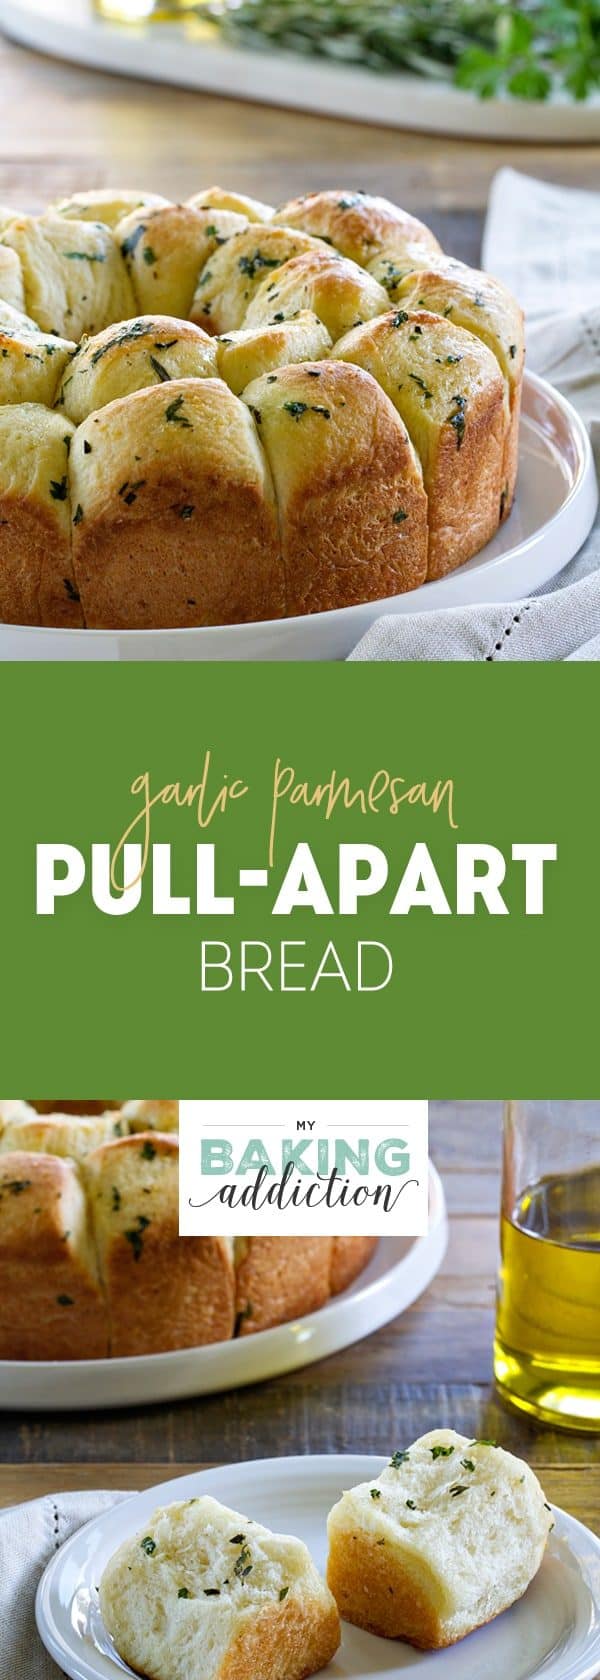 Garlic Parmesan Pull-Apart Bread is great for serving next to turkey and stuffing or spaghetti and meatballs. A total crowd pleaser!